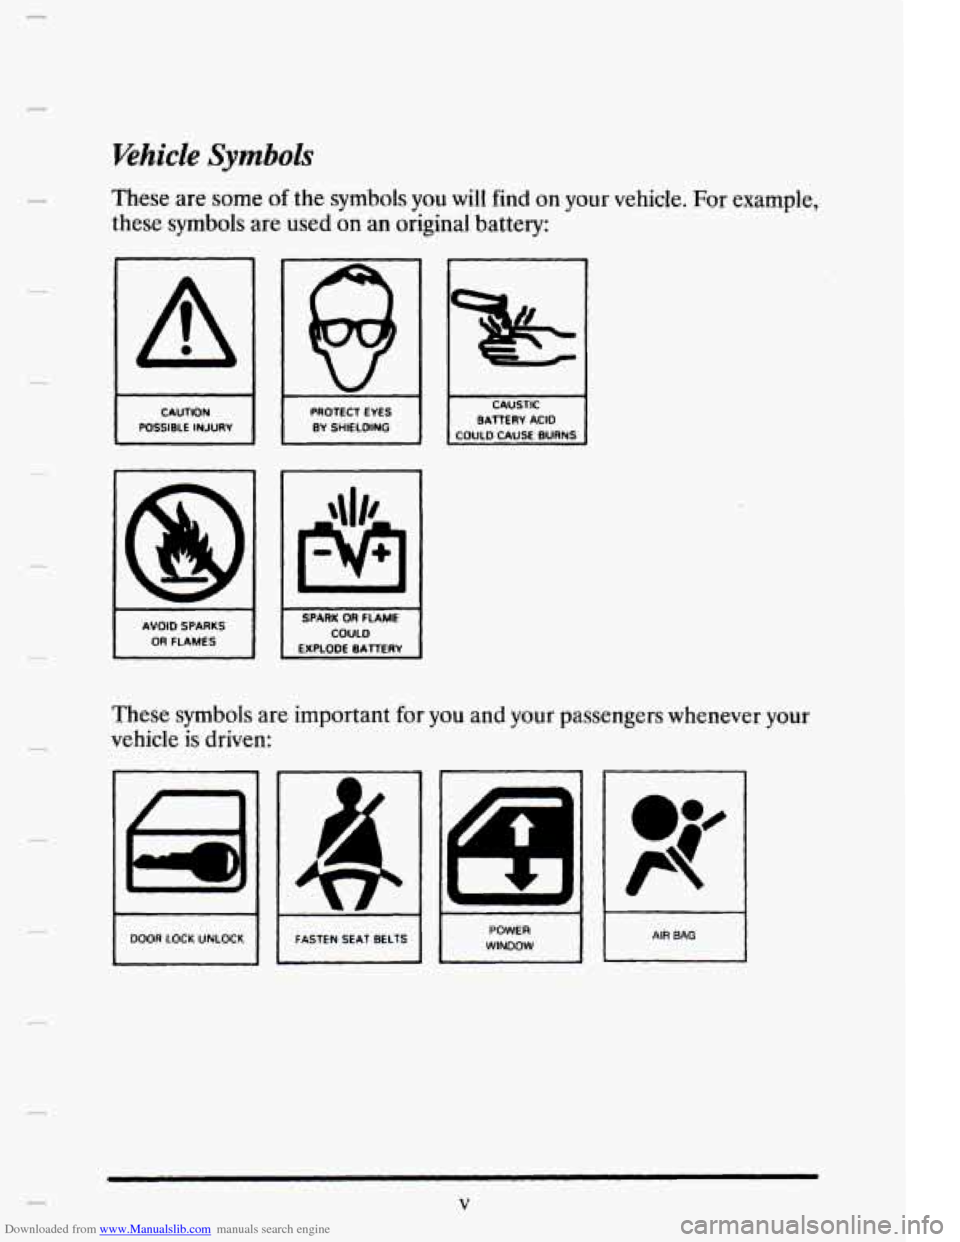 CADILLAC ELDORADO 1995 10.G User Guide Downloaded from www.Manualslib.com manuals search engine c 
Khicle Symbols 
These are some of the symbols  you  will  find on your  vehicle. For example, 
these  symbols  are  used 
on an  original  b